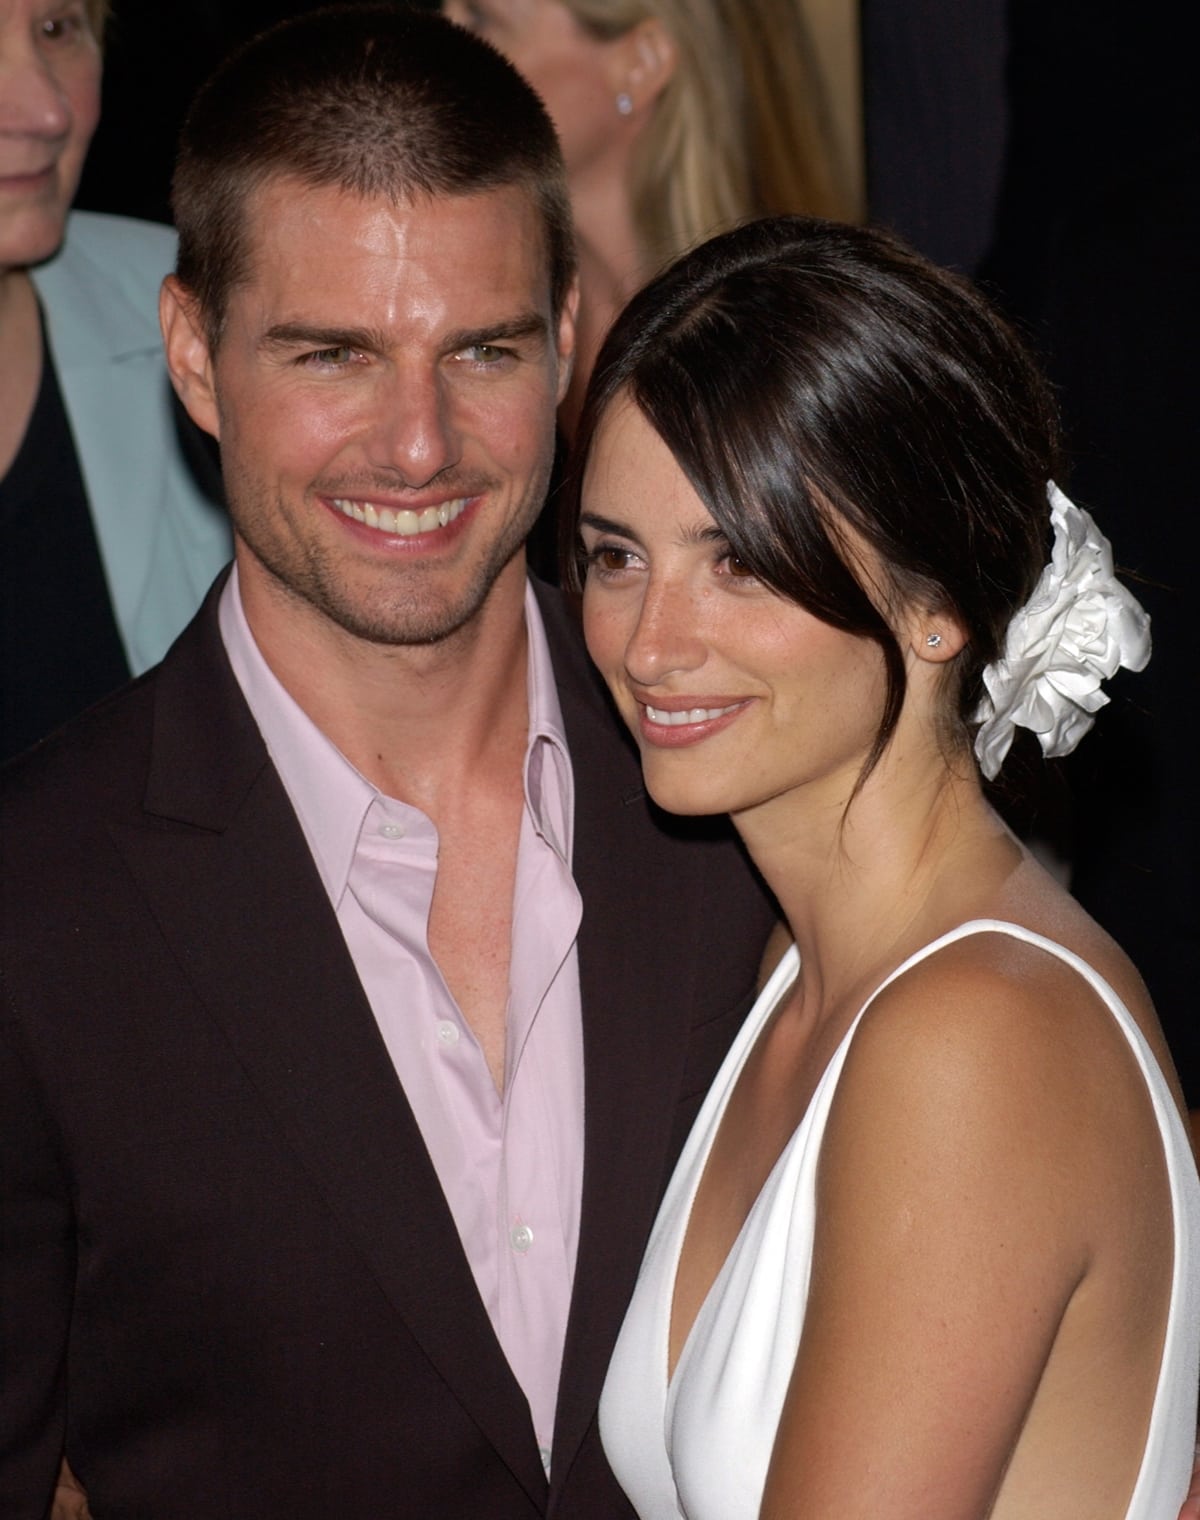 Tom Cruise and Penelope Cruz dated for almost three years from 2001 to January 2004